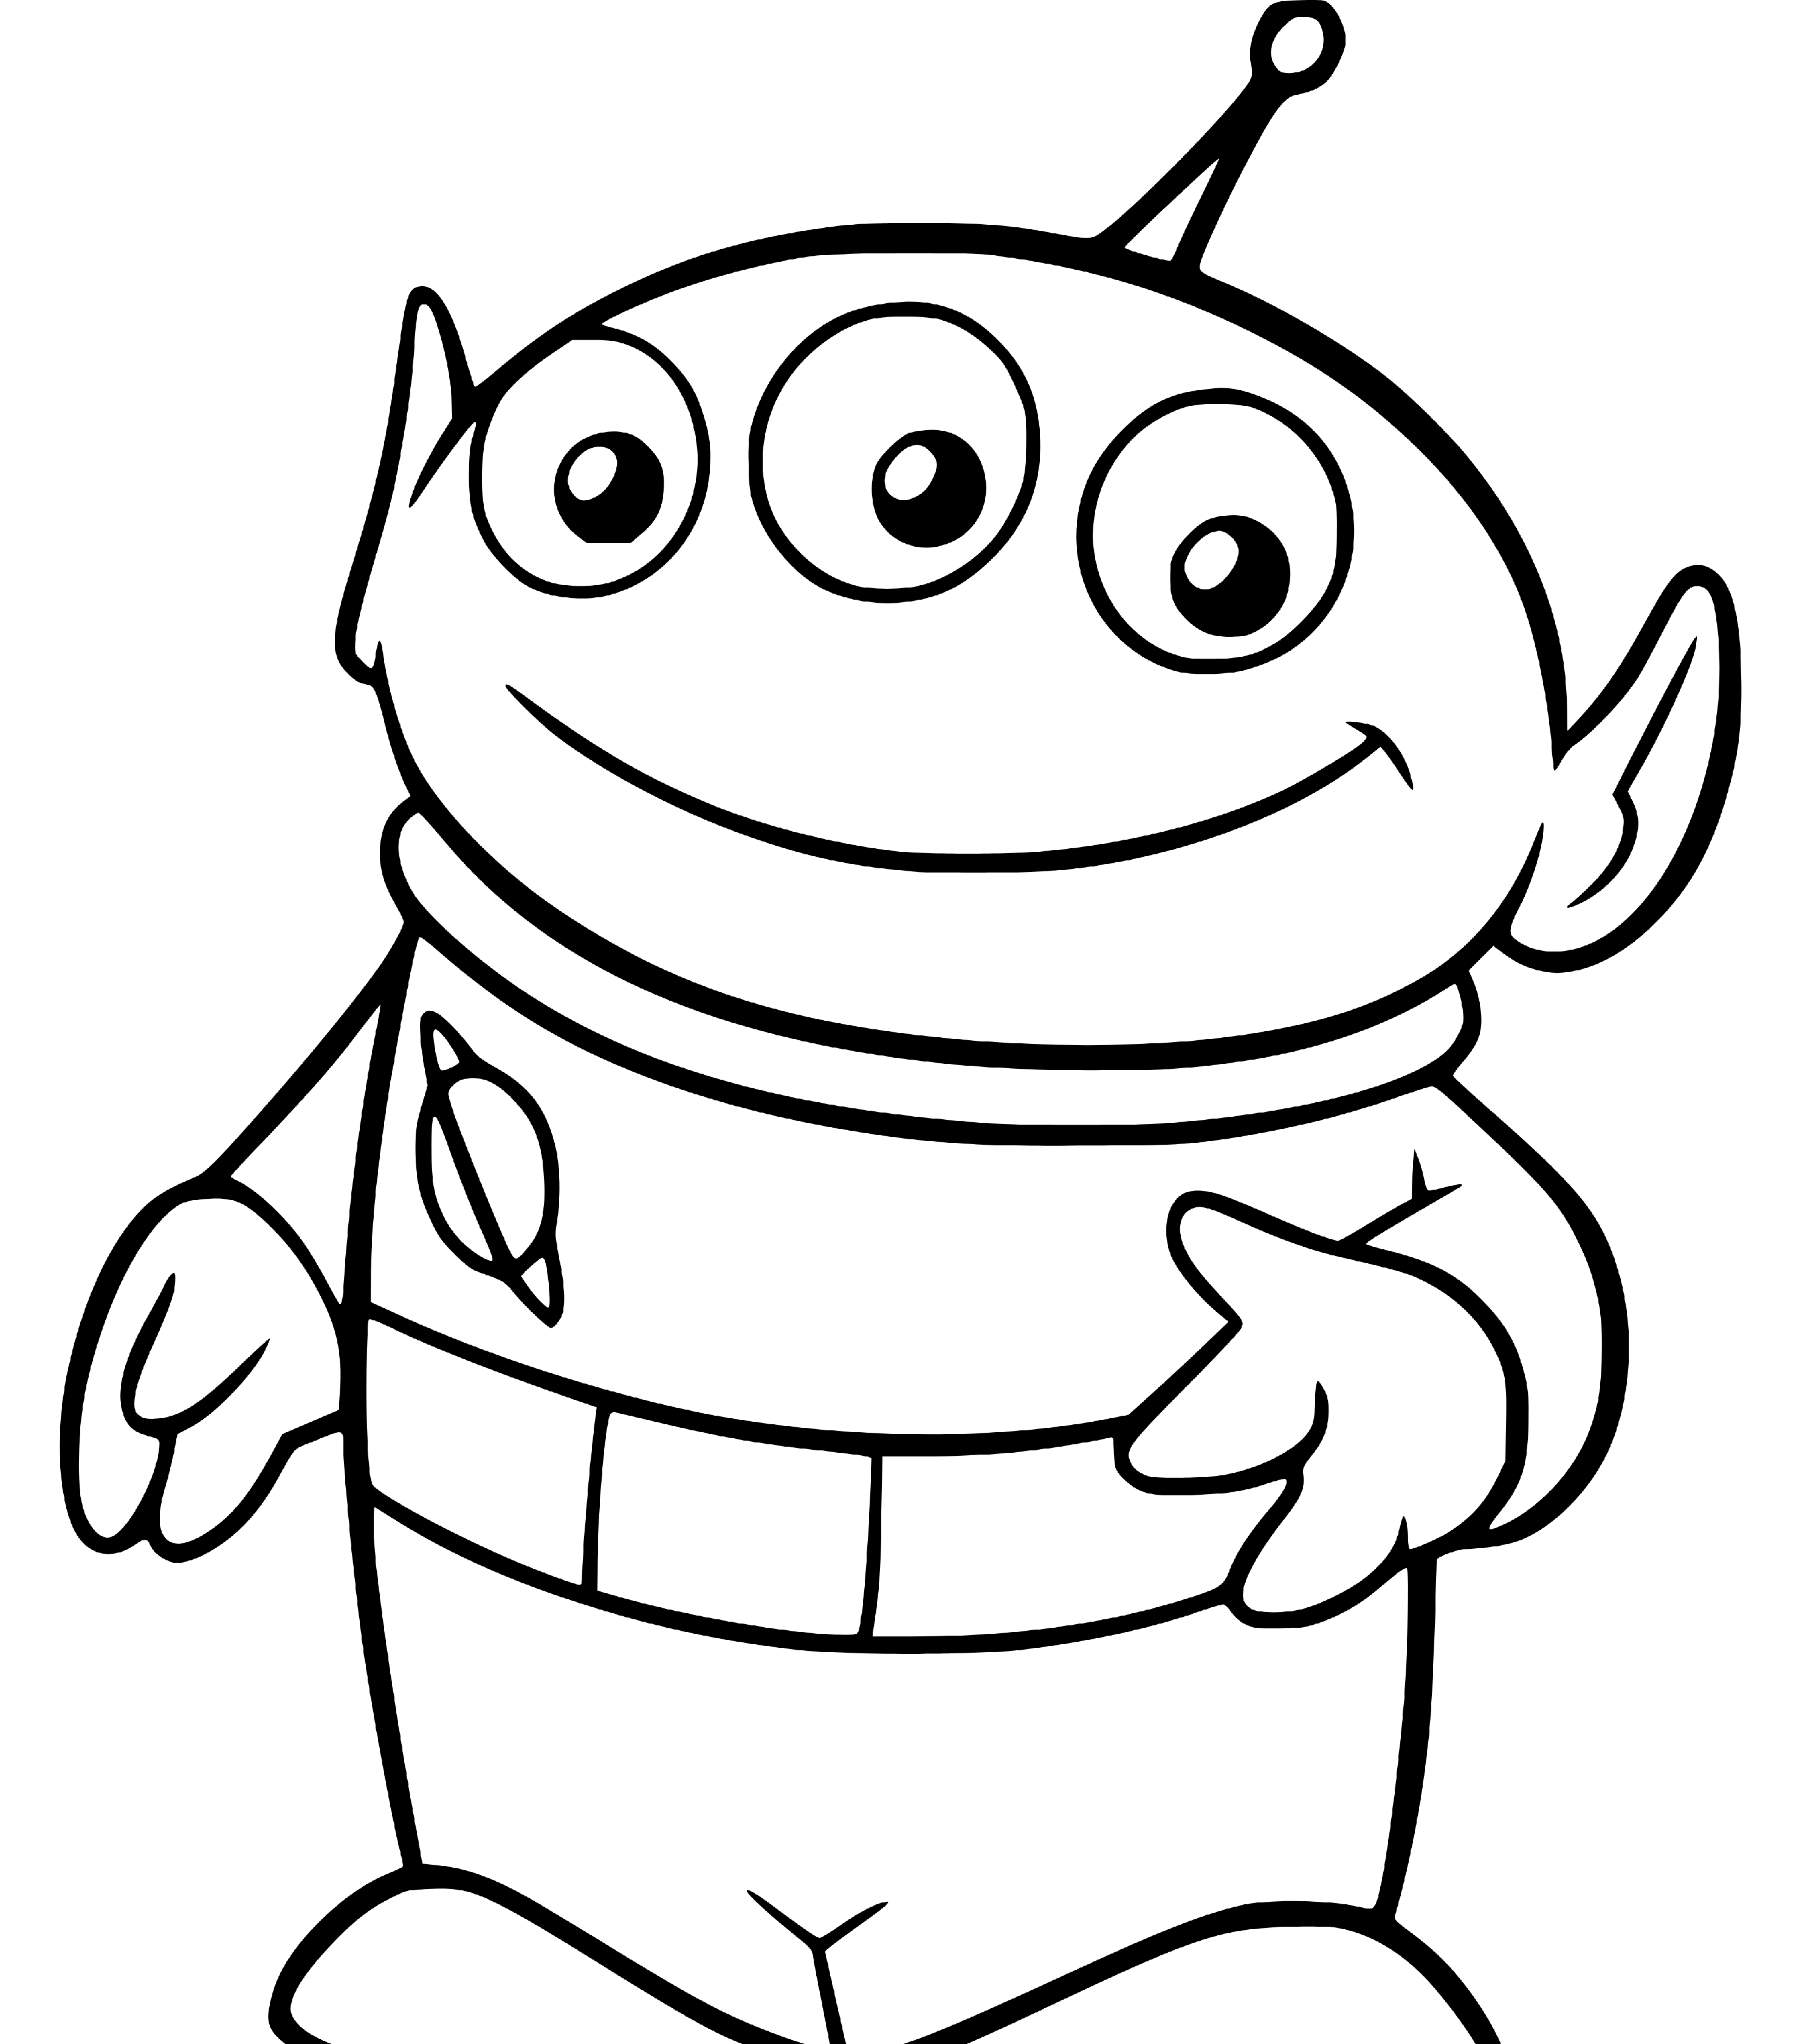 Toy Story Alien (Three Eyes) Coloring Sheet for Kids - SheetalColor.com